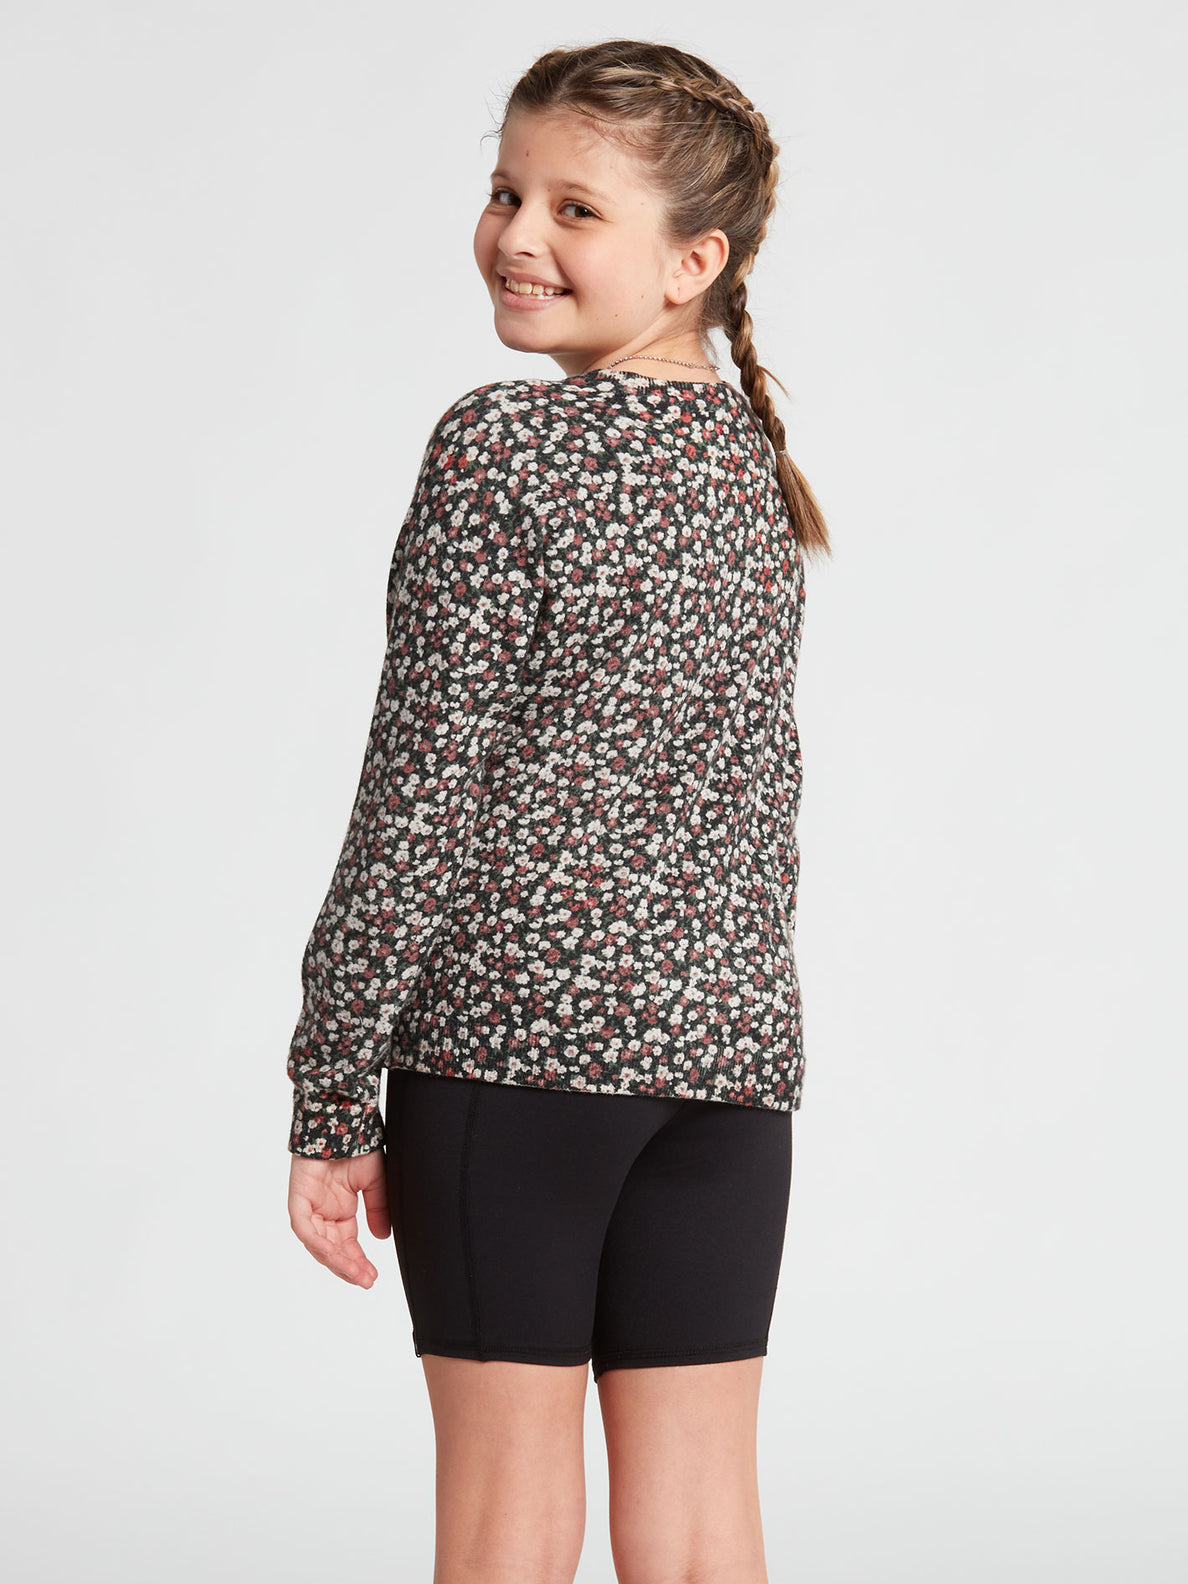 Big Girls Over N Out Sweater - Black Combo